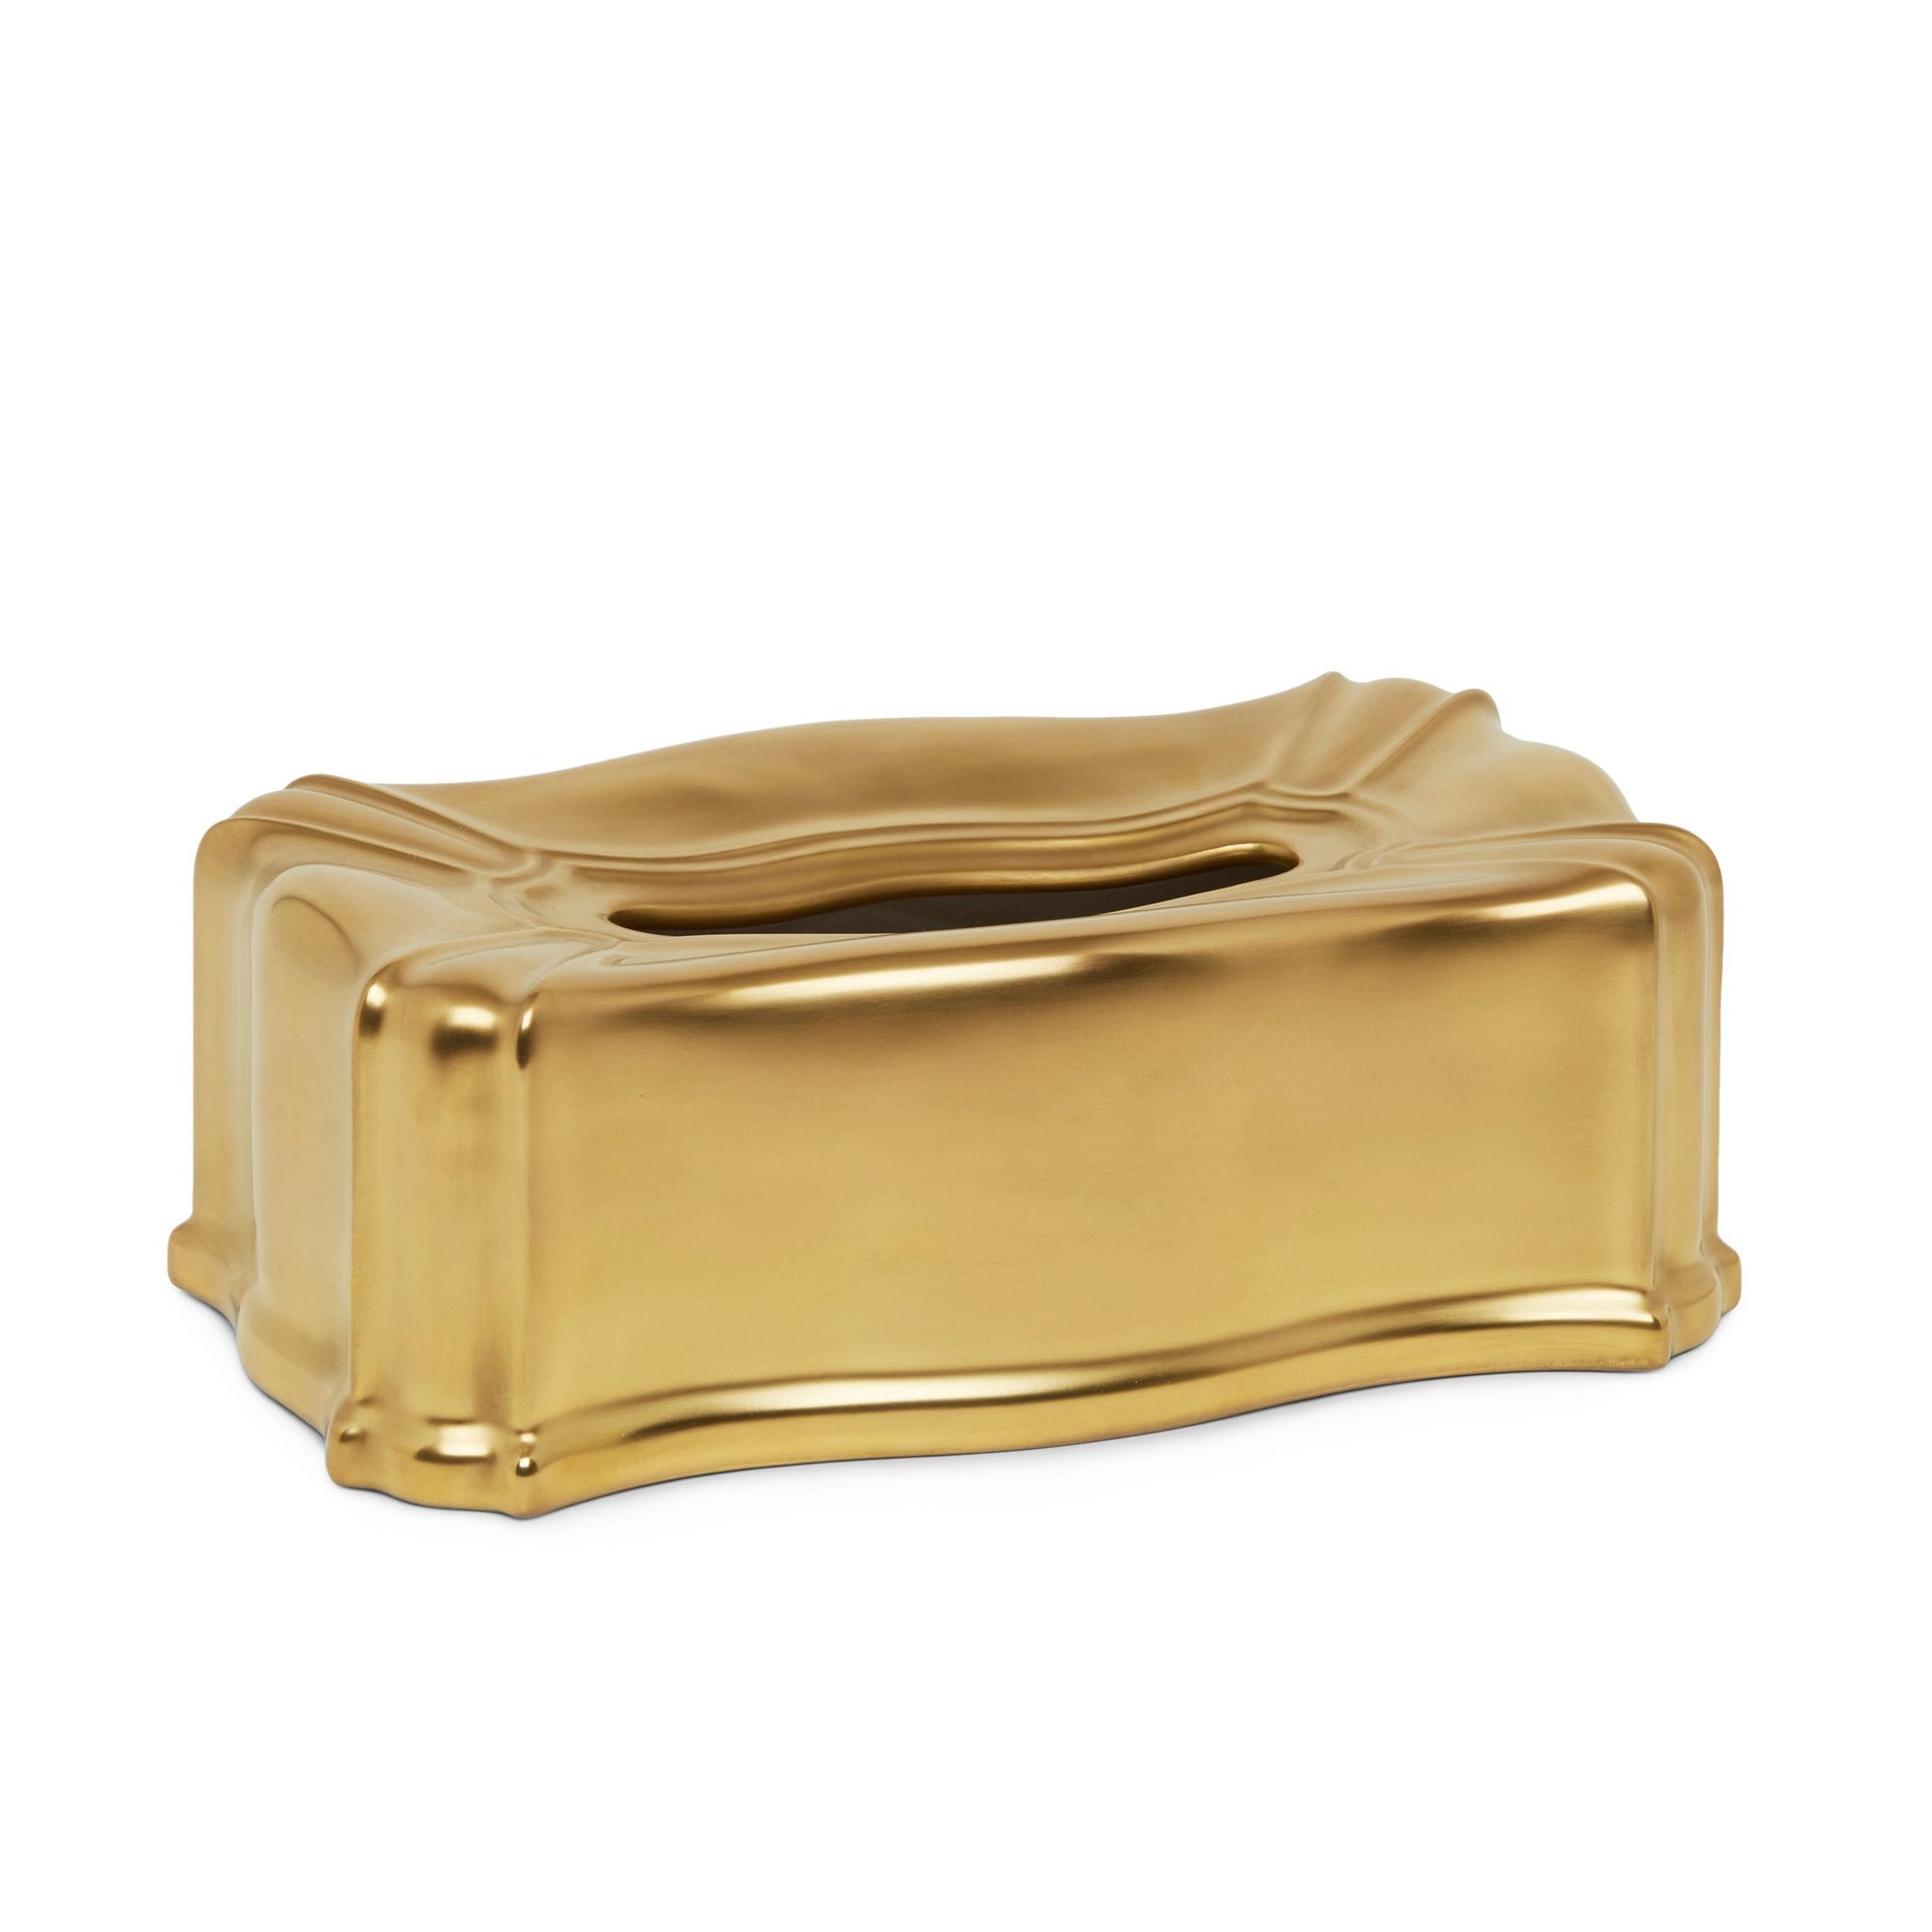 3413-14GP Sherle Wagner International Ceramic Elongated Tissue Box Cover with Burnished Gold 14GP